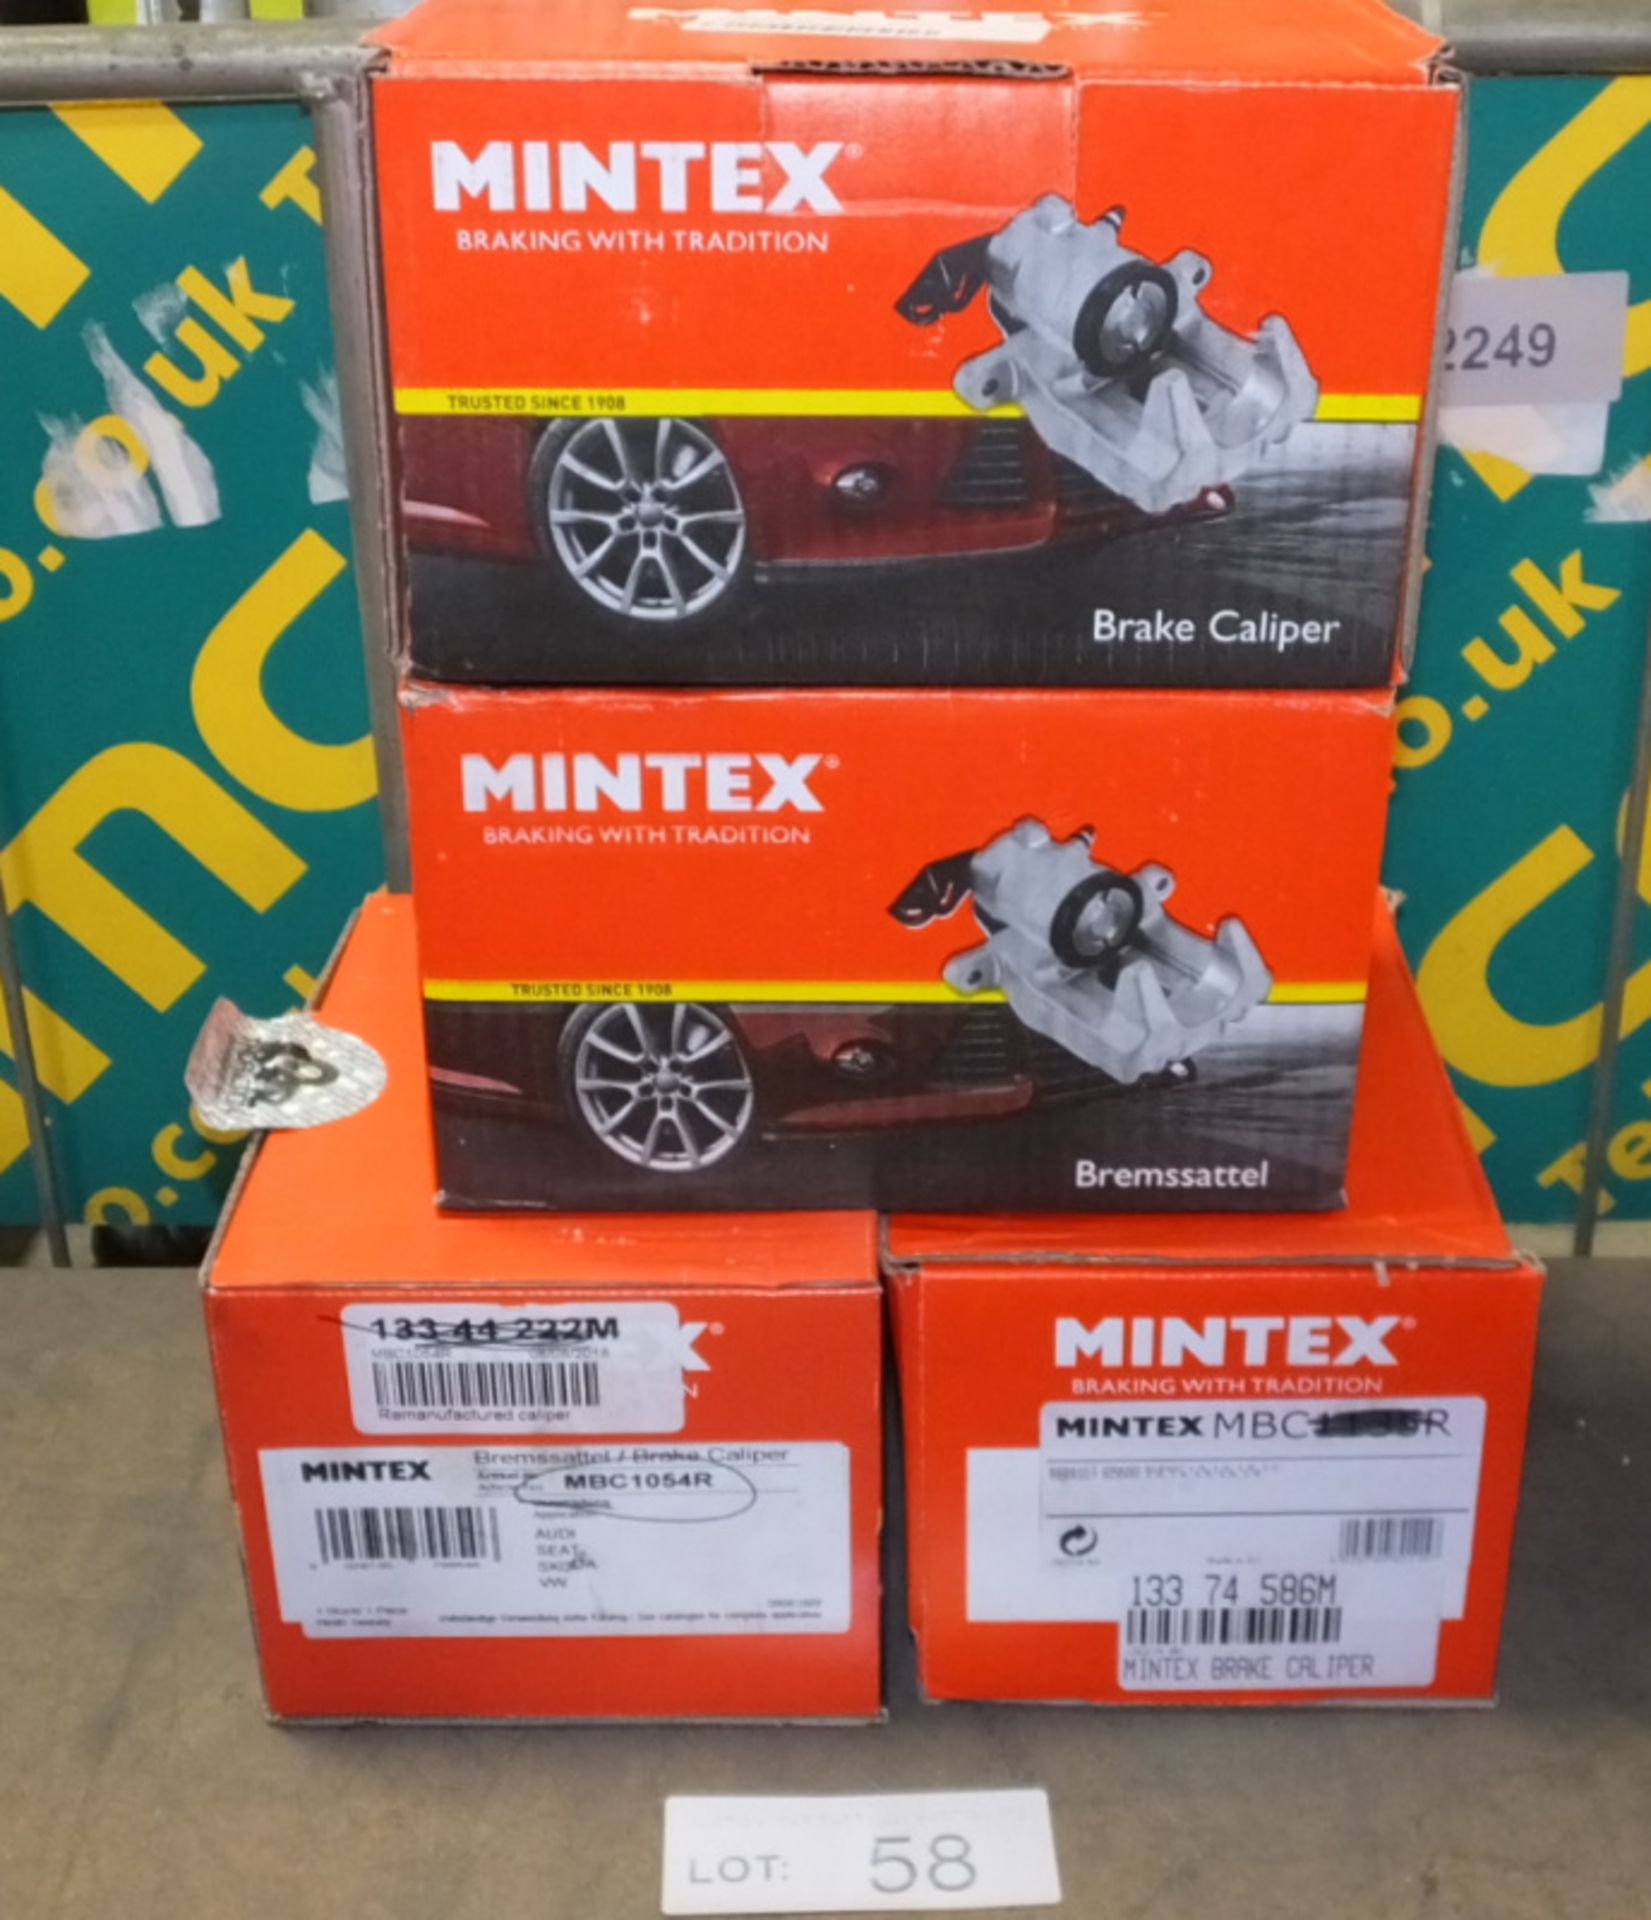 Mintex Brake Calipers - Please see pictures for examples of part numbers.